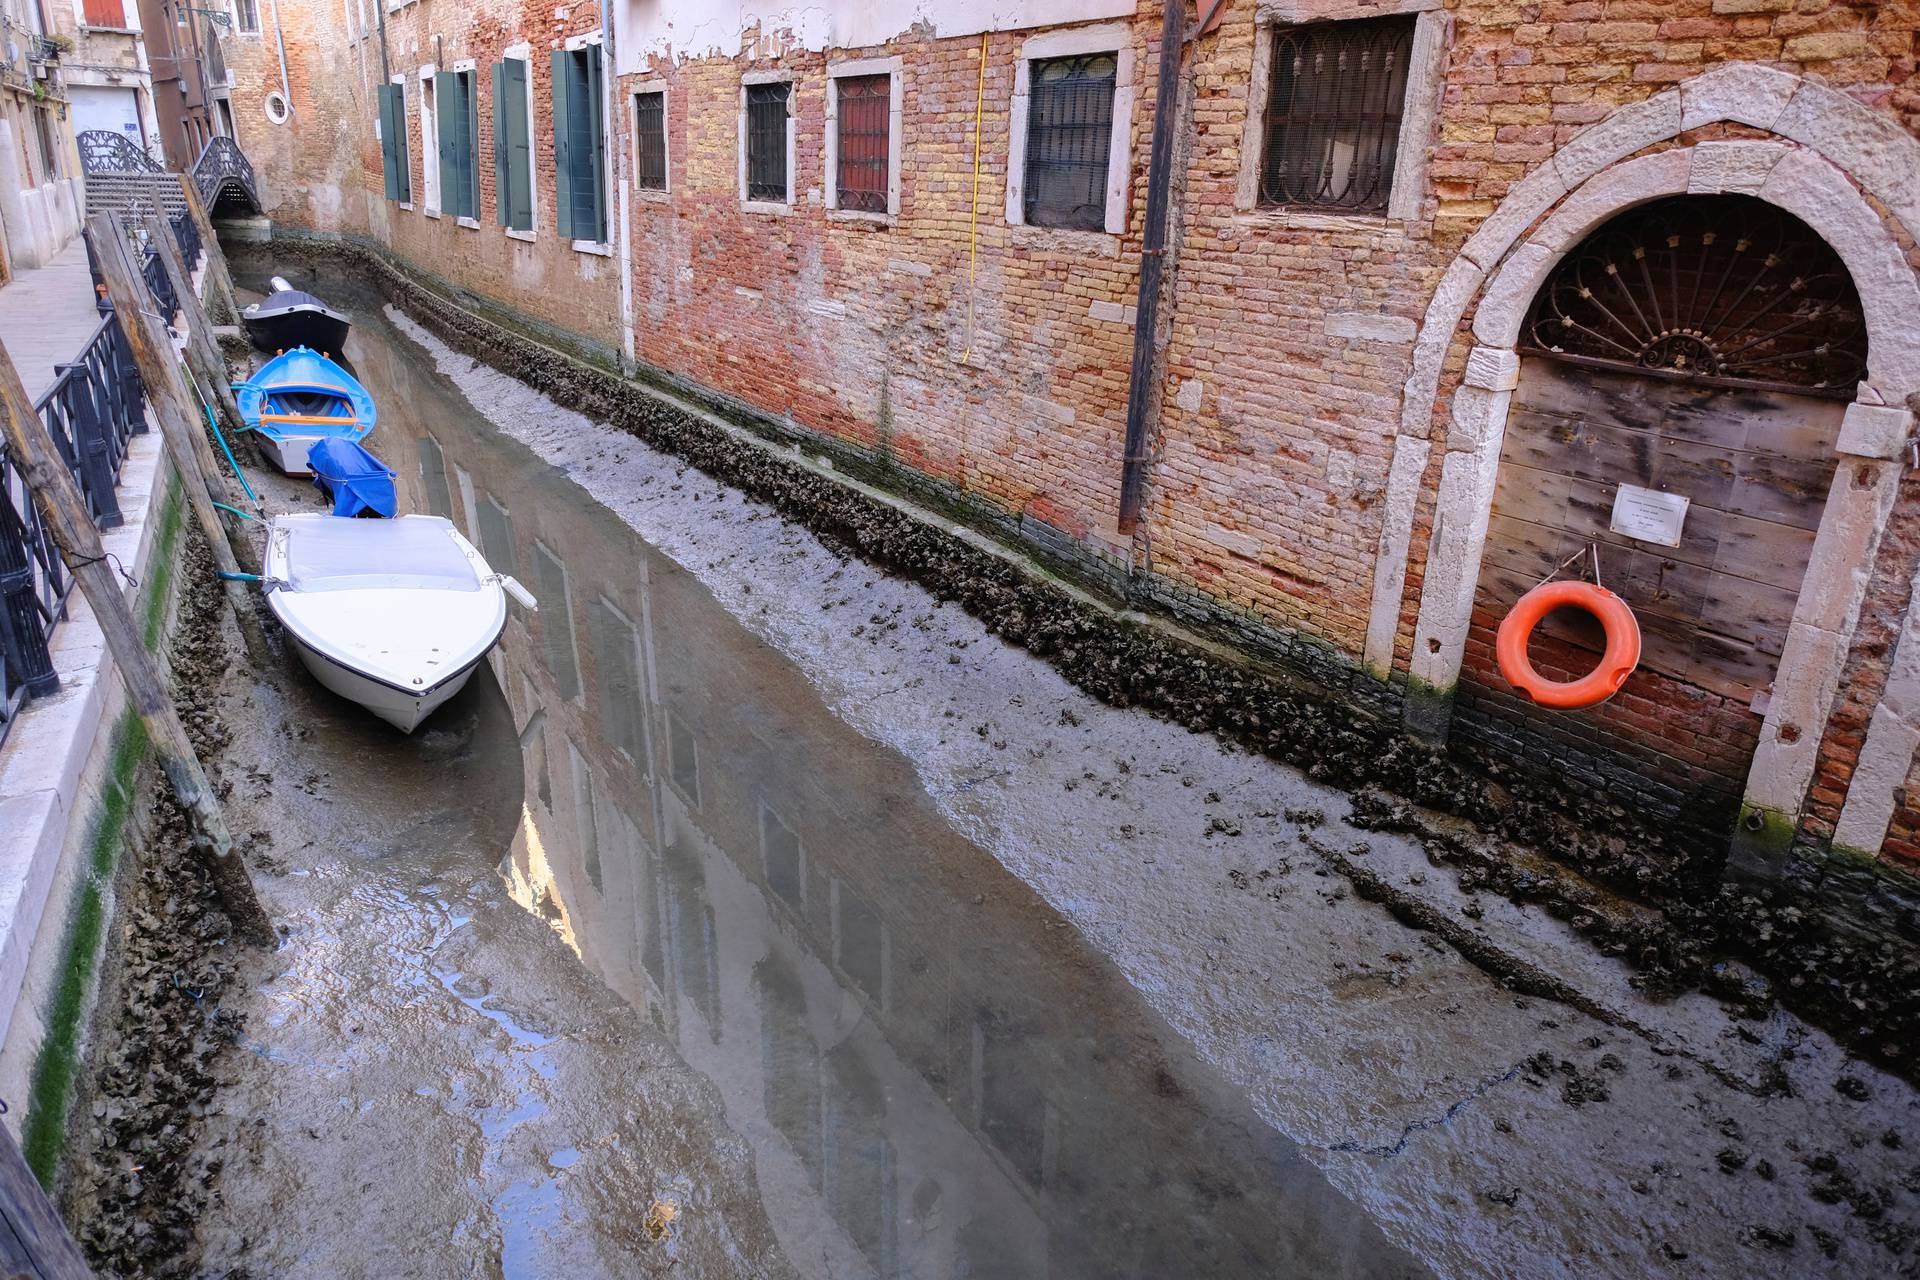 Boats are seen in a canal during an exceptionally low tide in the lagoon city of Venice